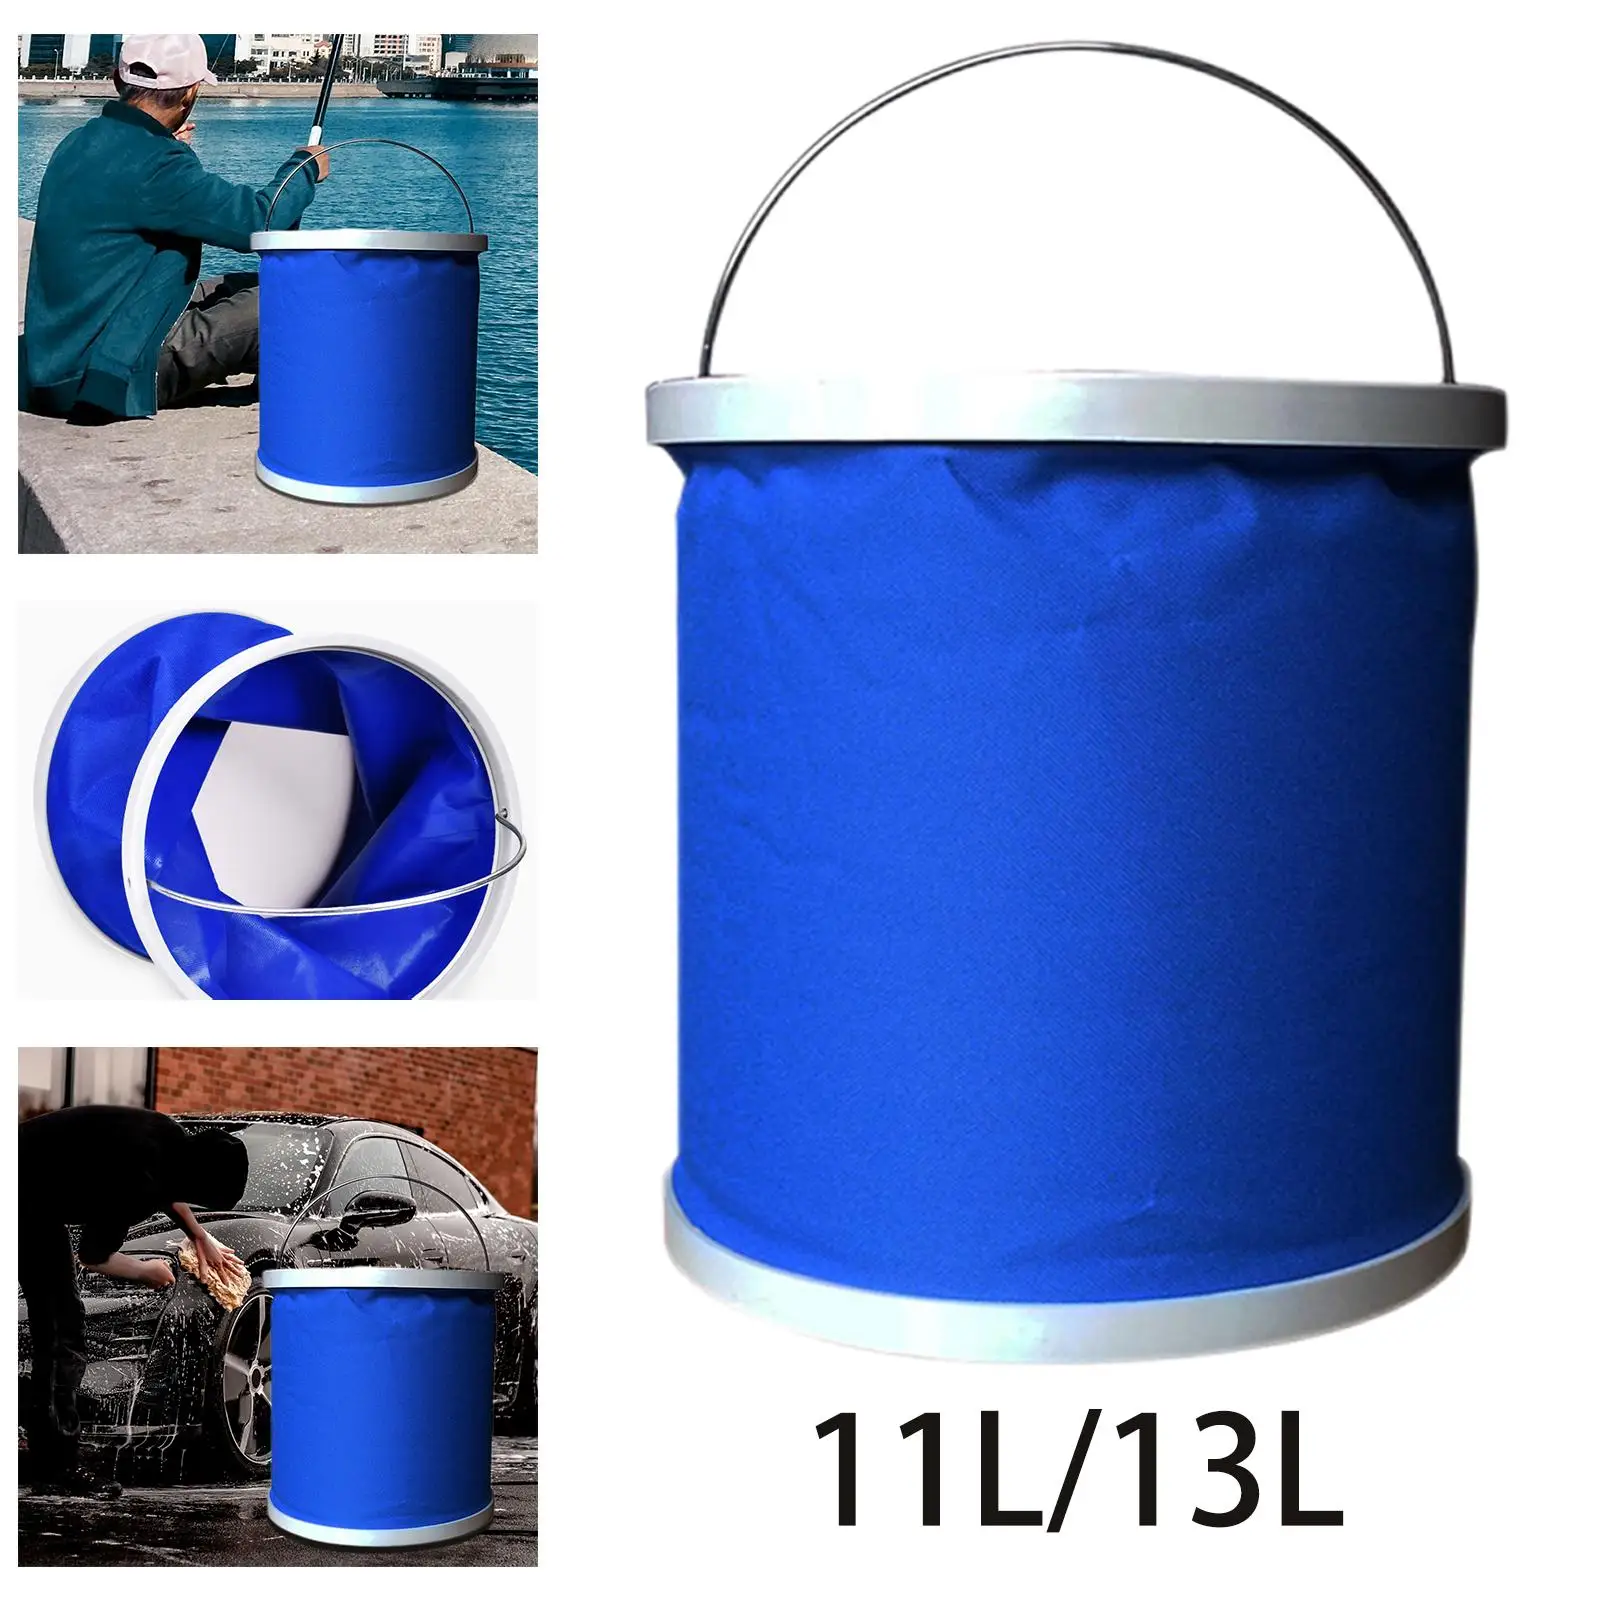 Folding Outdoor Collapsible Bucket Carrier Wash Basin Car Trash Cans Retractable Camping for Fishing Car Washing Hiking Picnic